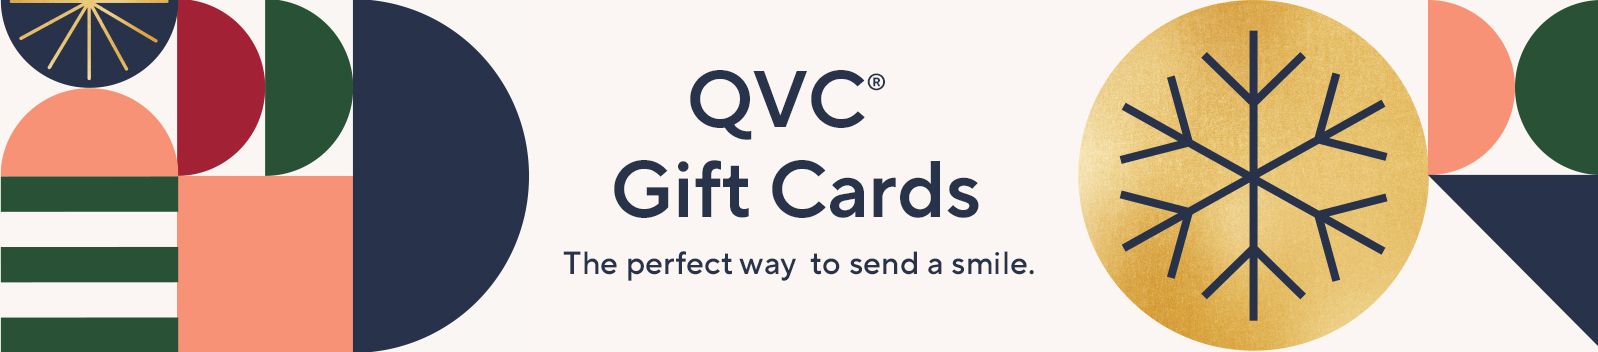 QVC® Gift Cards. The perfect way to send a smile.